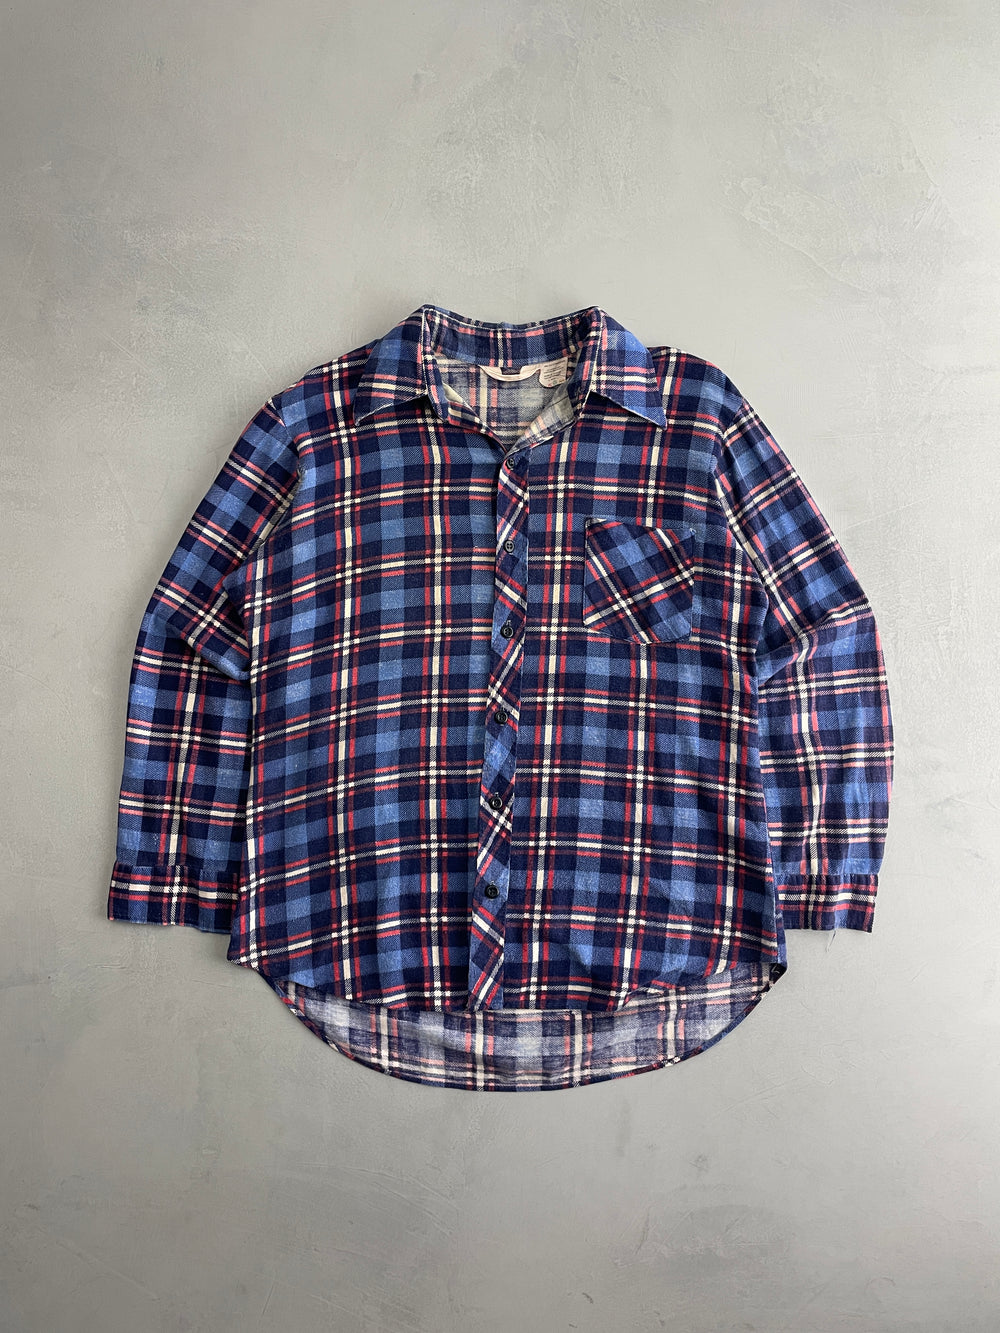 70's Johnny West Flannel Shirt [M]